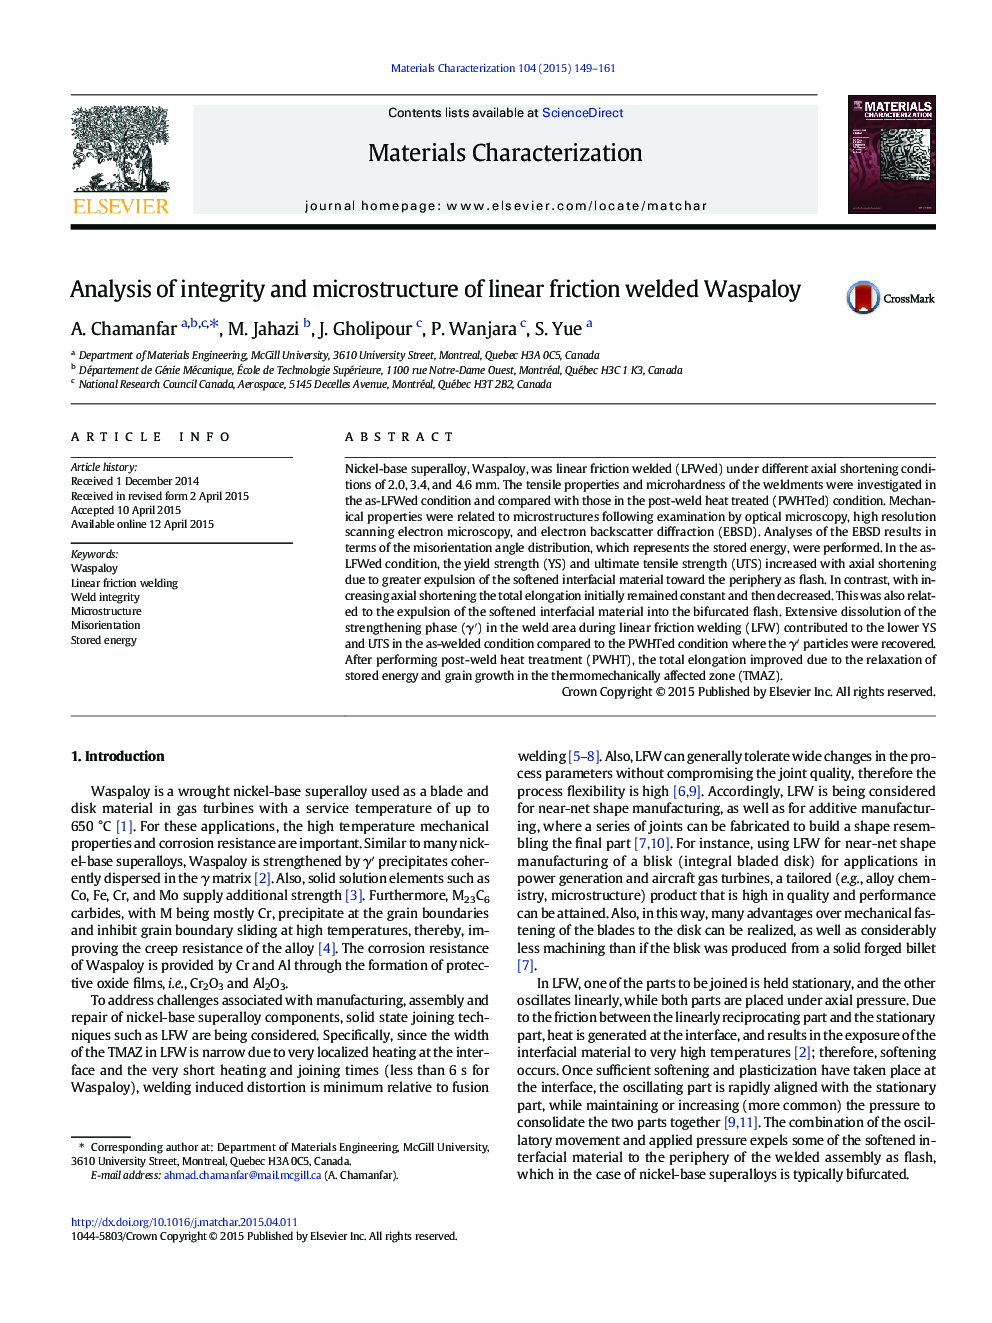 Analysis of integrity and microstructure of linear friction welded Waspaloy